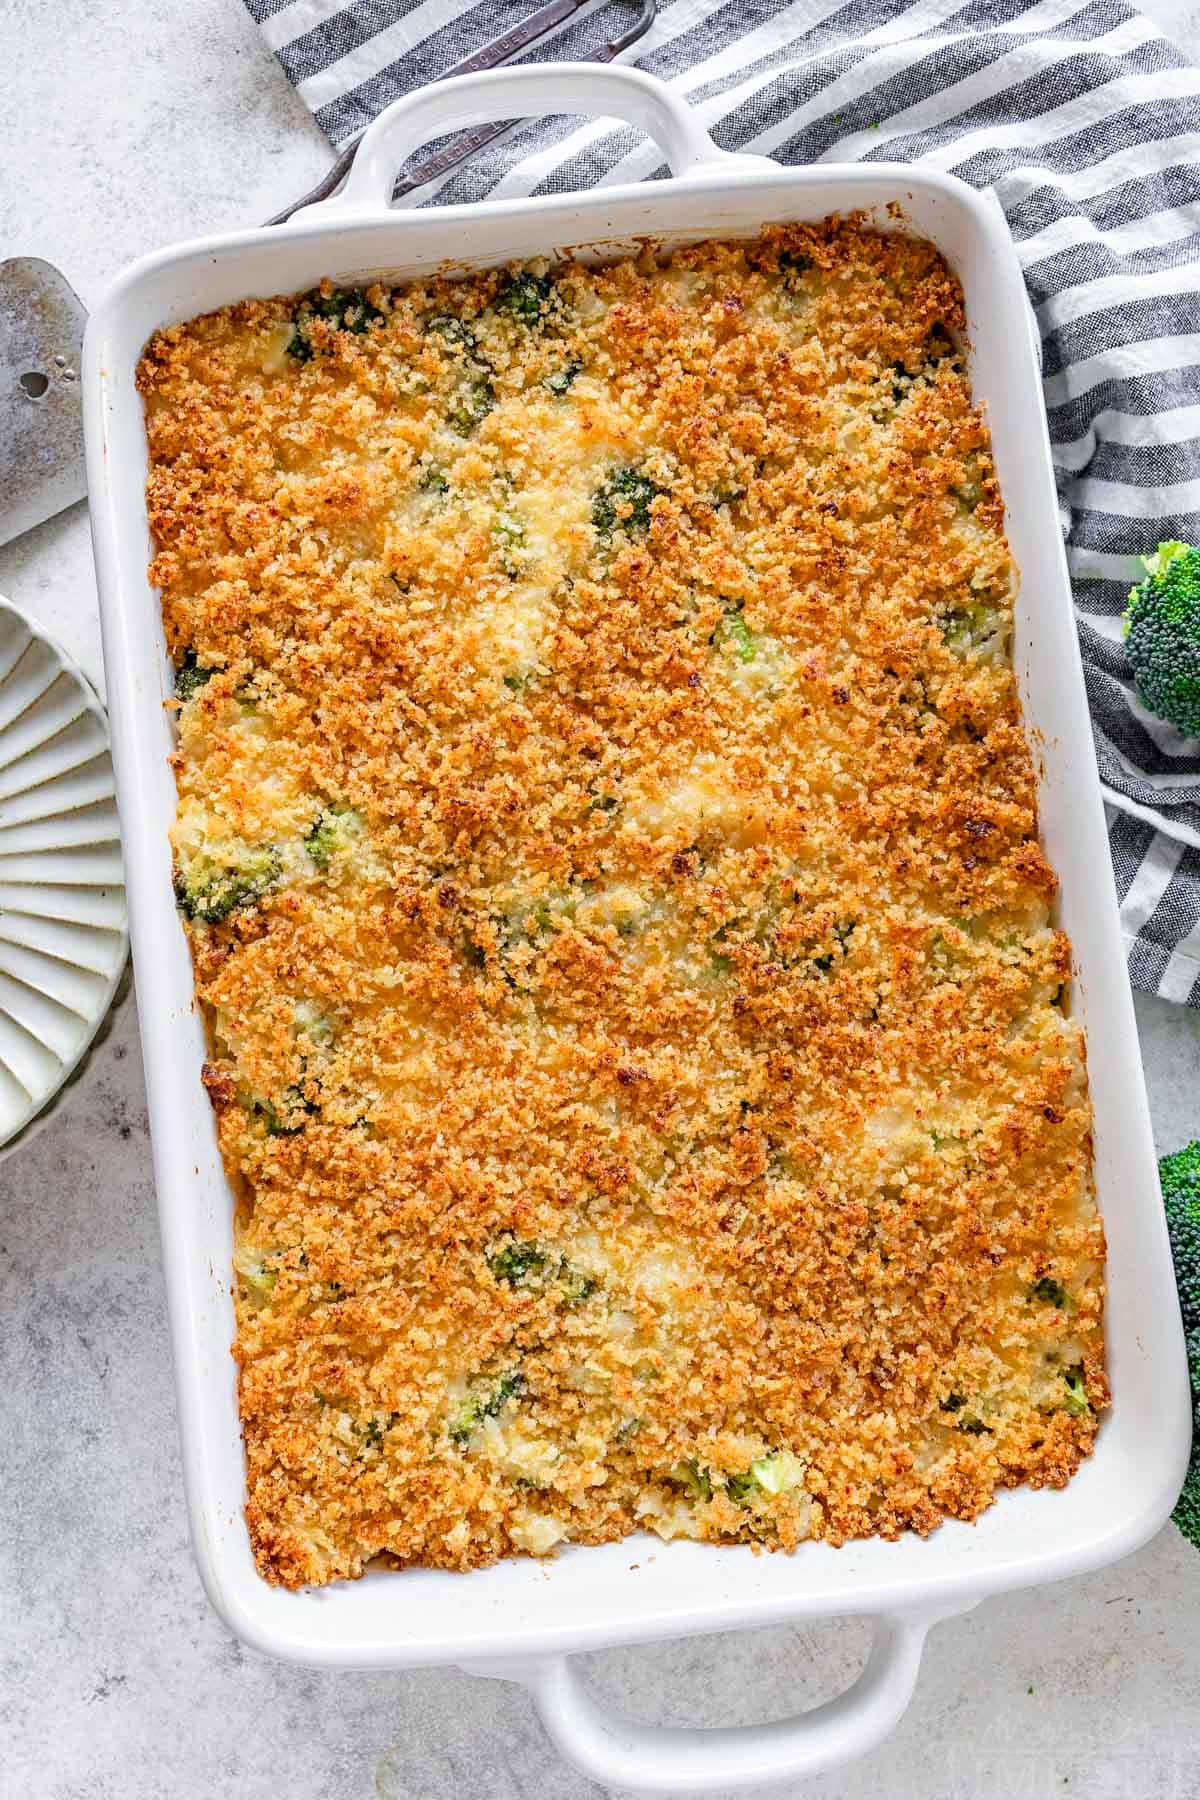 top down look at broccoli rice cheese casserole in a white baking dish next to a black and white striped towel.